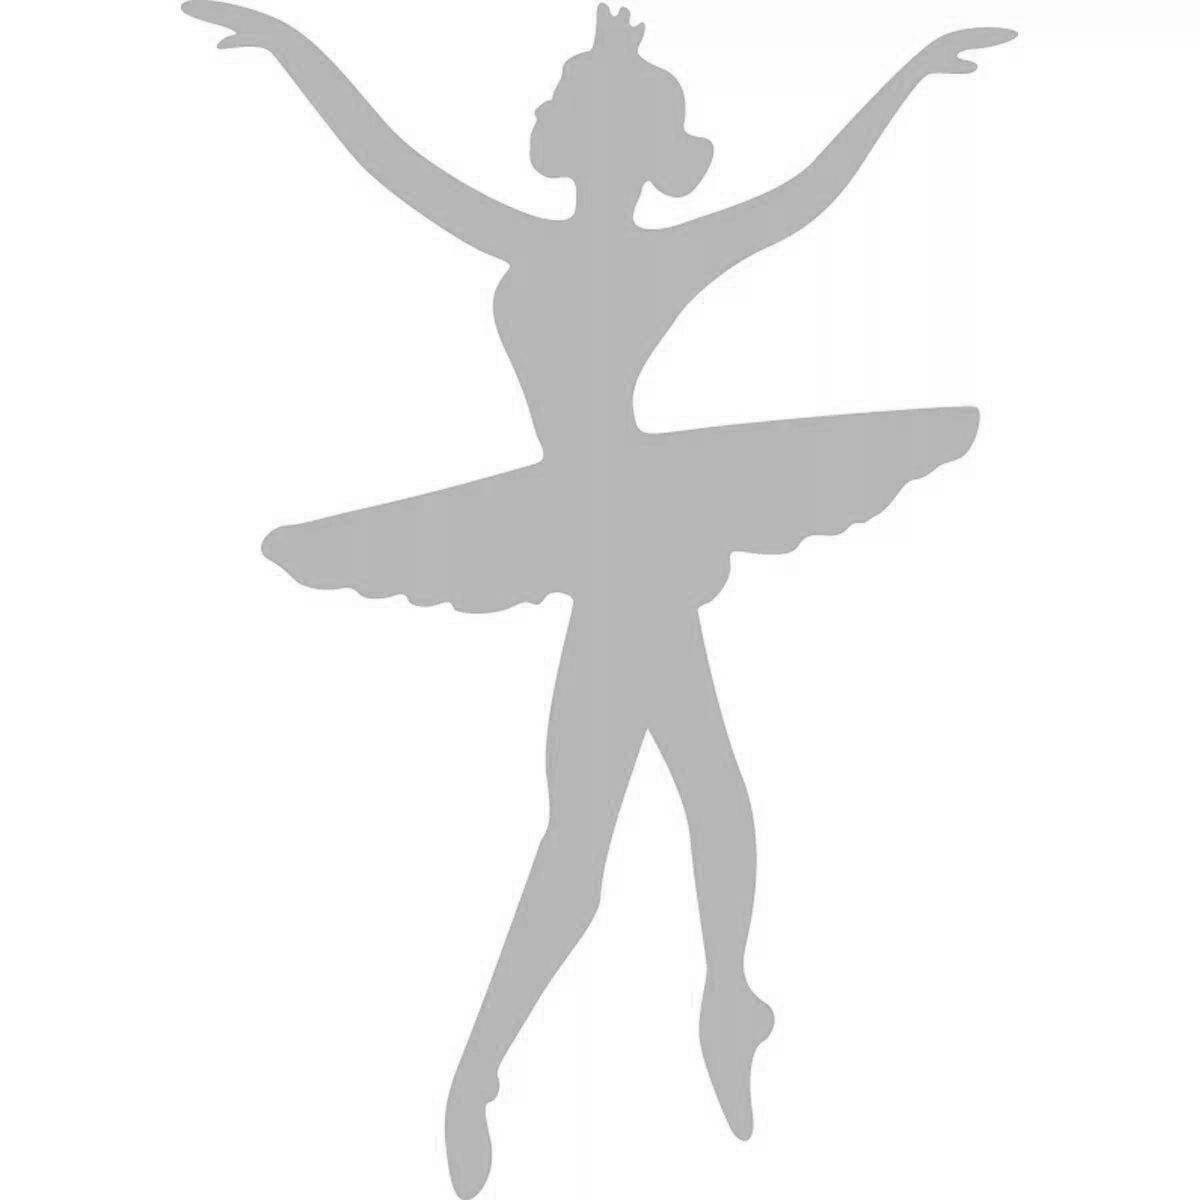 Coloring page whimsical ballerina silhouette